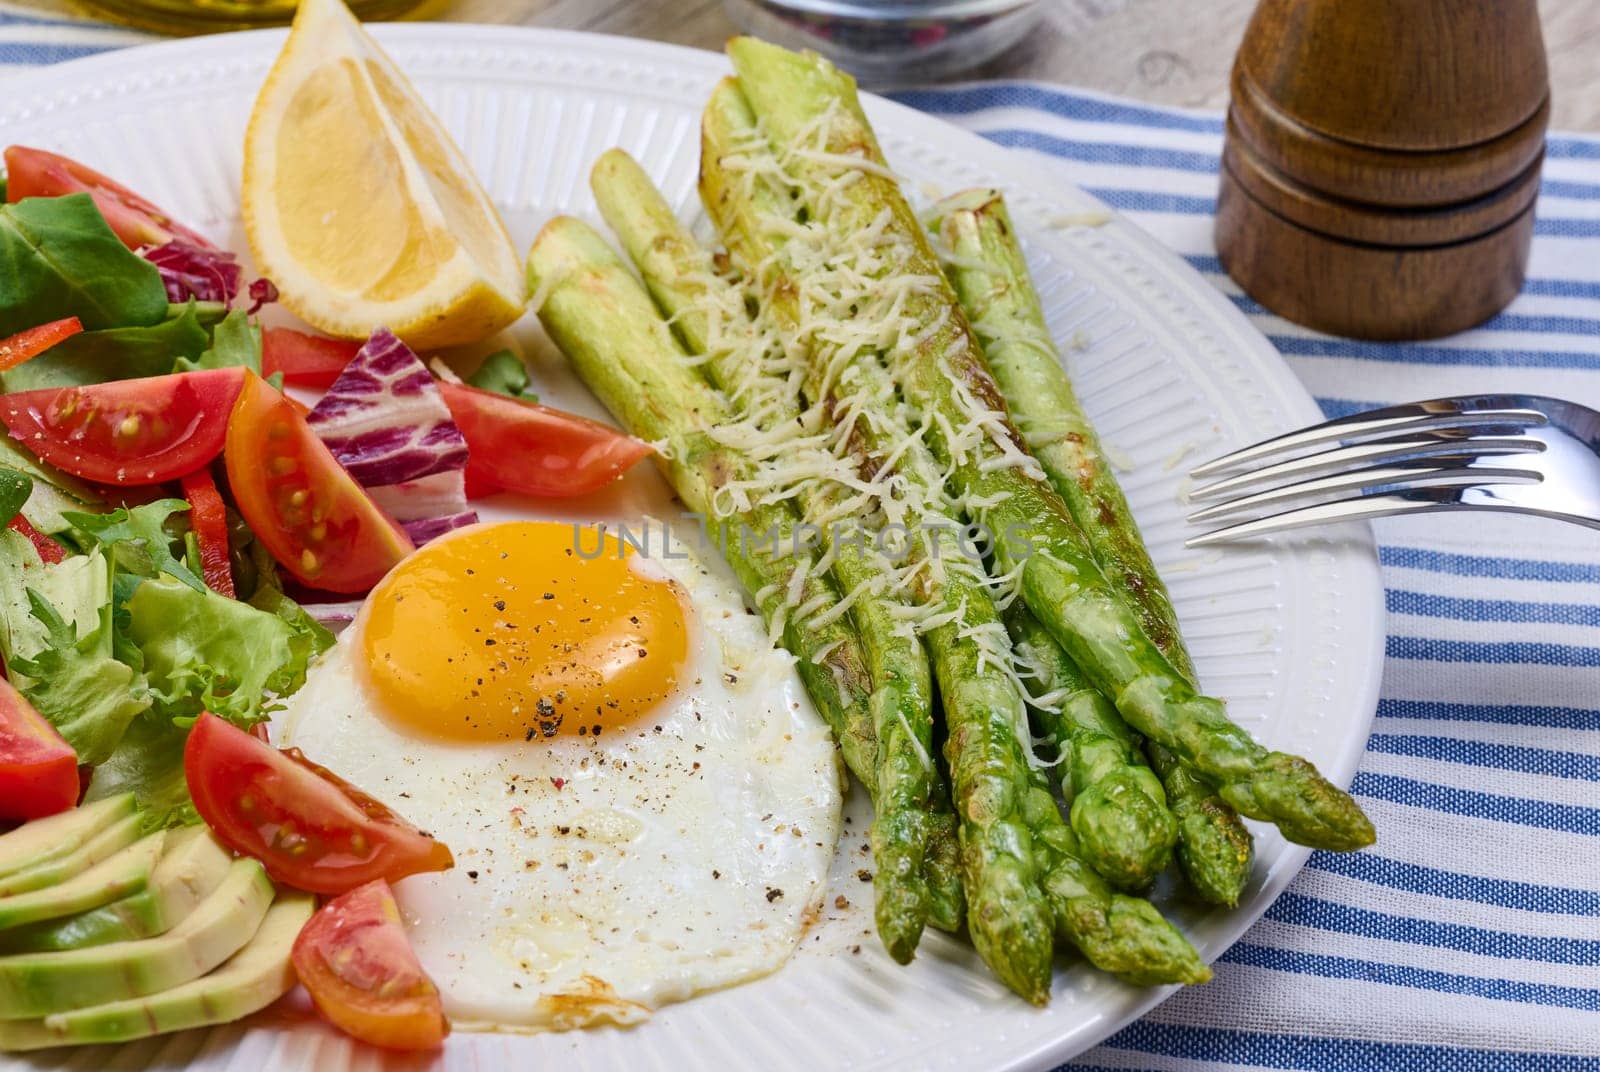 Round plate with cooked asparagus, fried egg, avocado and fresh vegetable salad on the table by ndanko